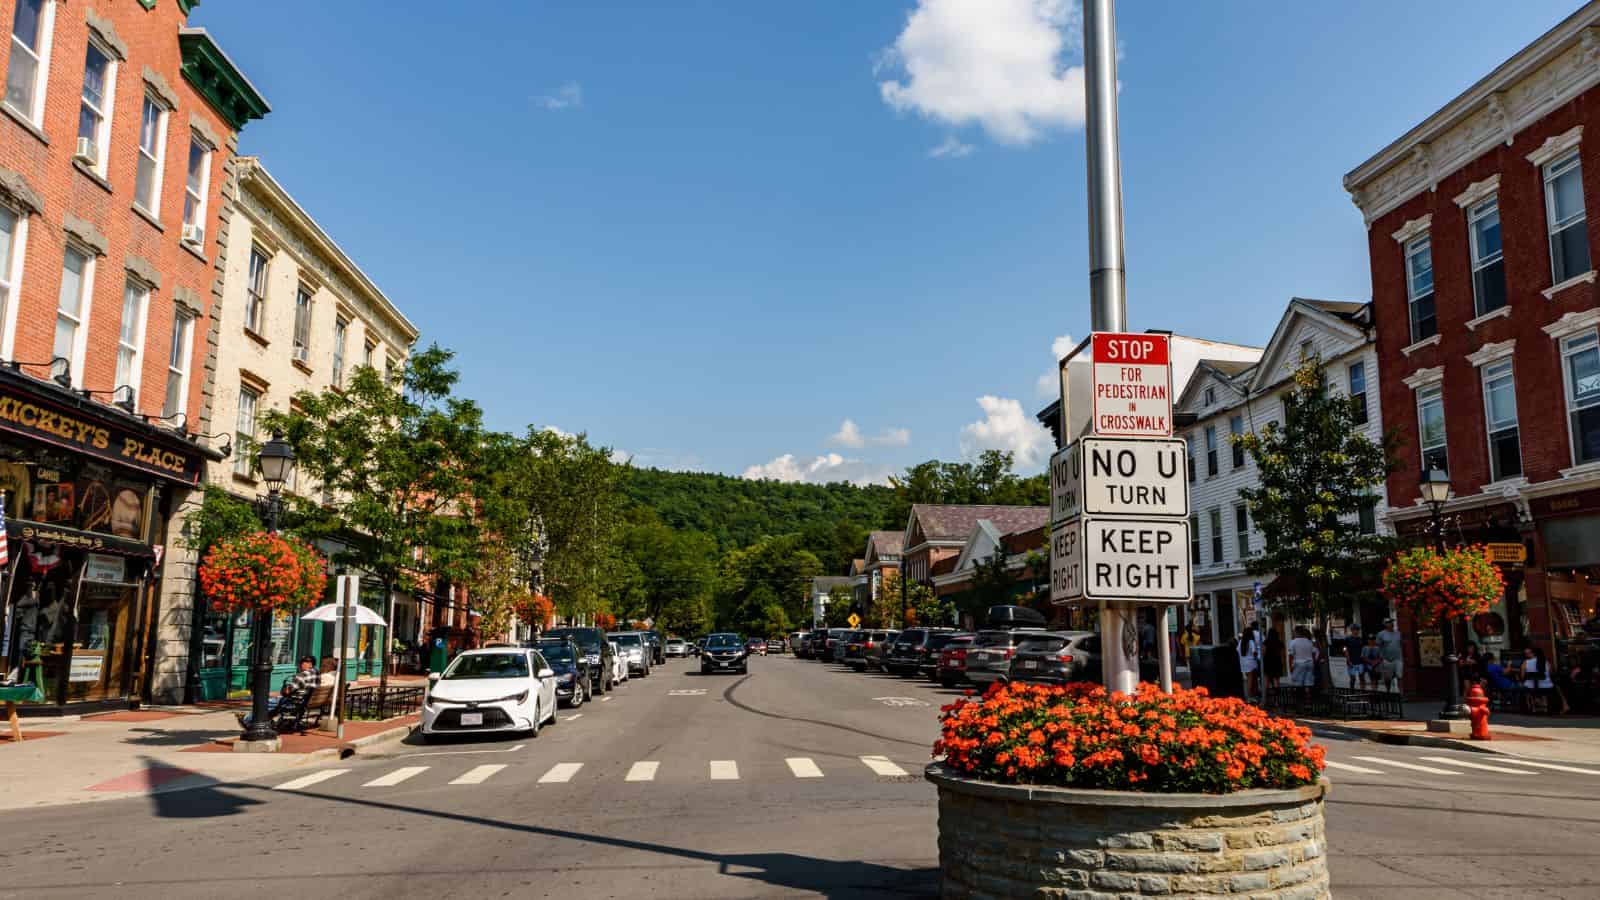 <p>New York’s Cooperstown is a fantastic small town to visit if you love attractions. Surprisingly, the Baseball Hall of Fame is based in this quaint location, along with the Fenimore Art Museum! Both attractions showcase the state's heritage excellently–there’s a ton to do in this charming town.</p>